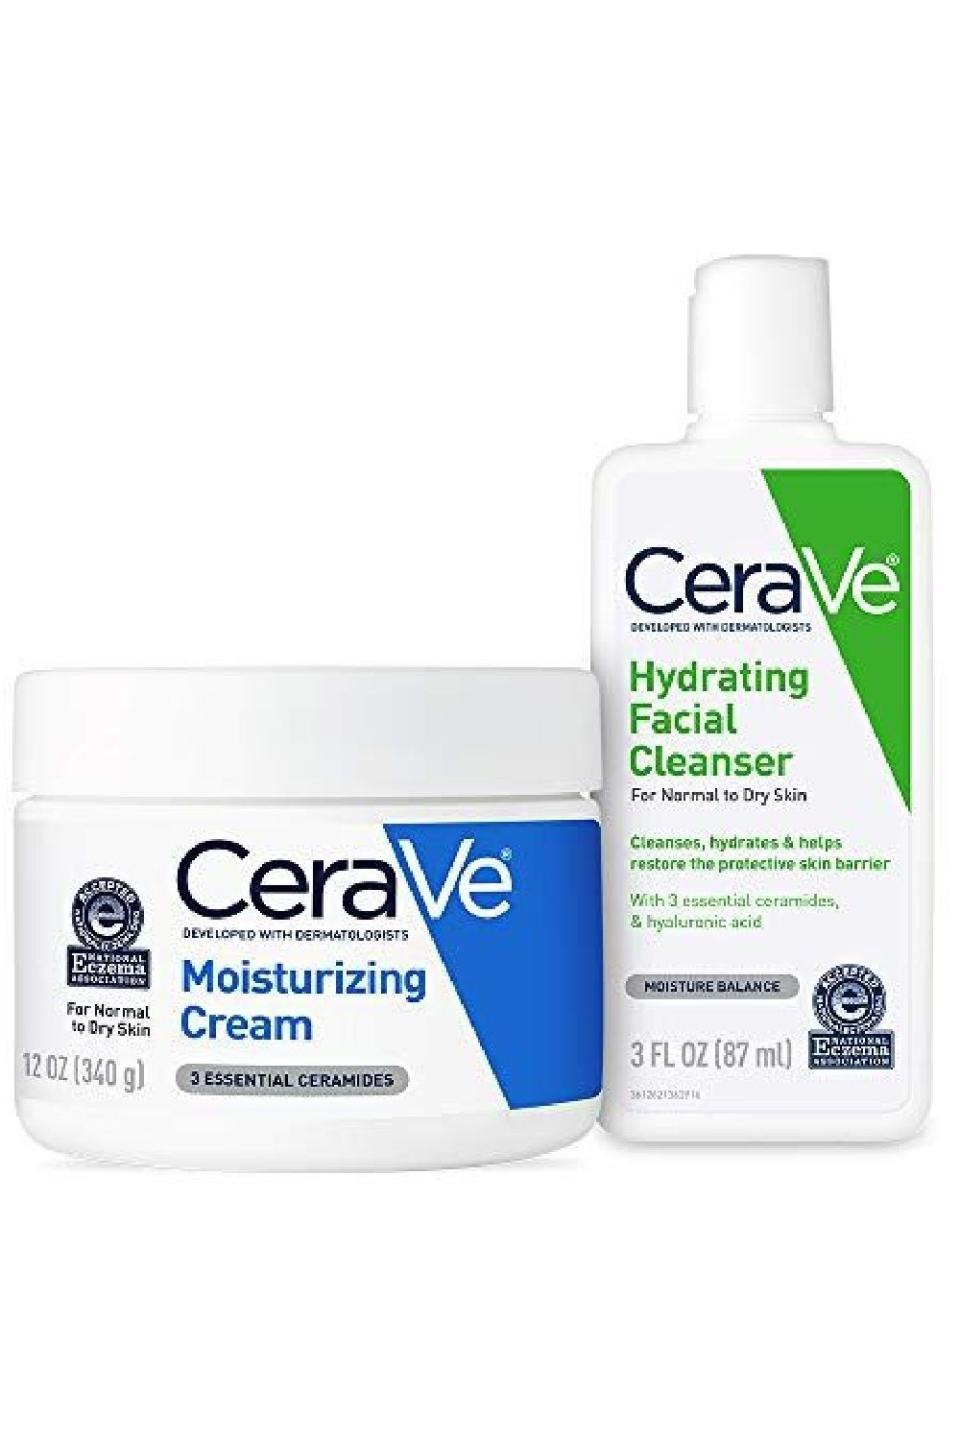 8) CeraVe Moisturizing Cream and Hydrating Facial Cleanser